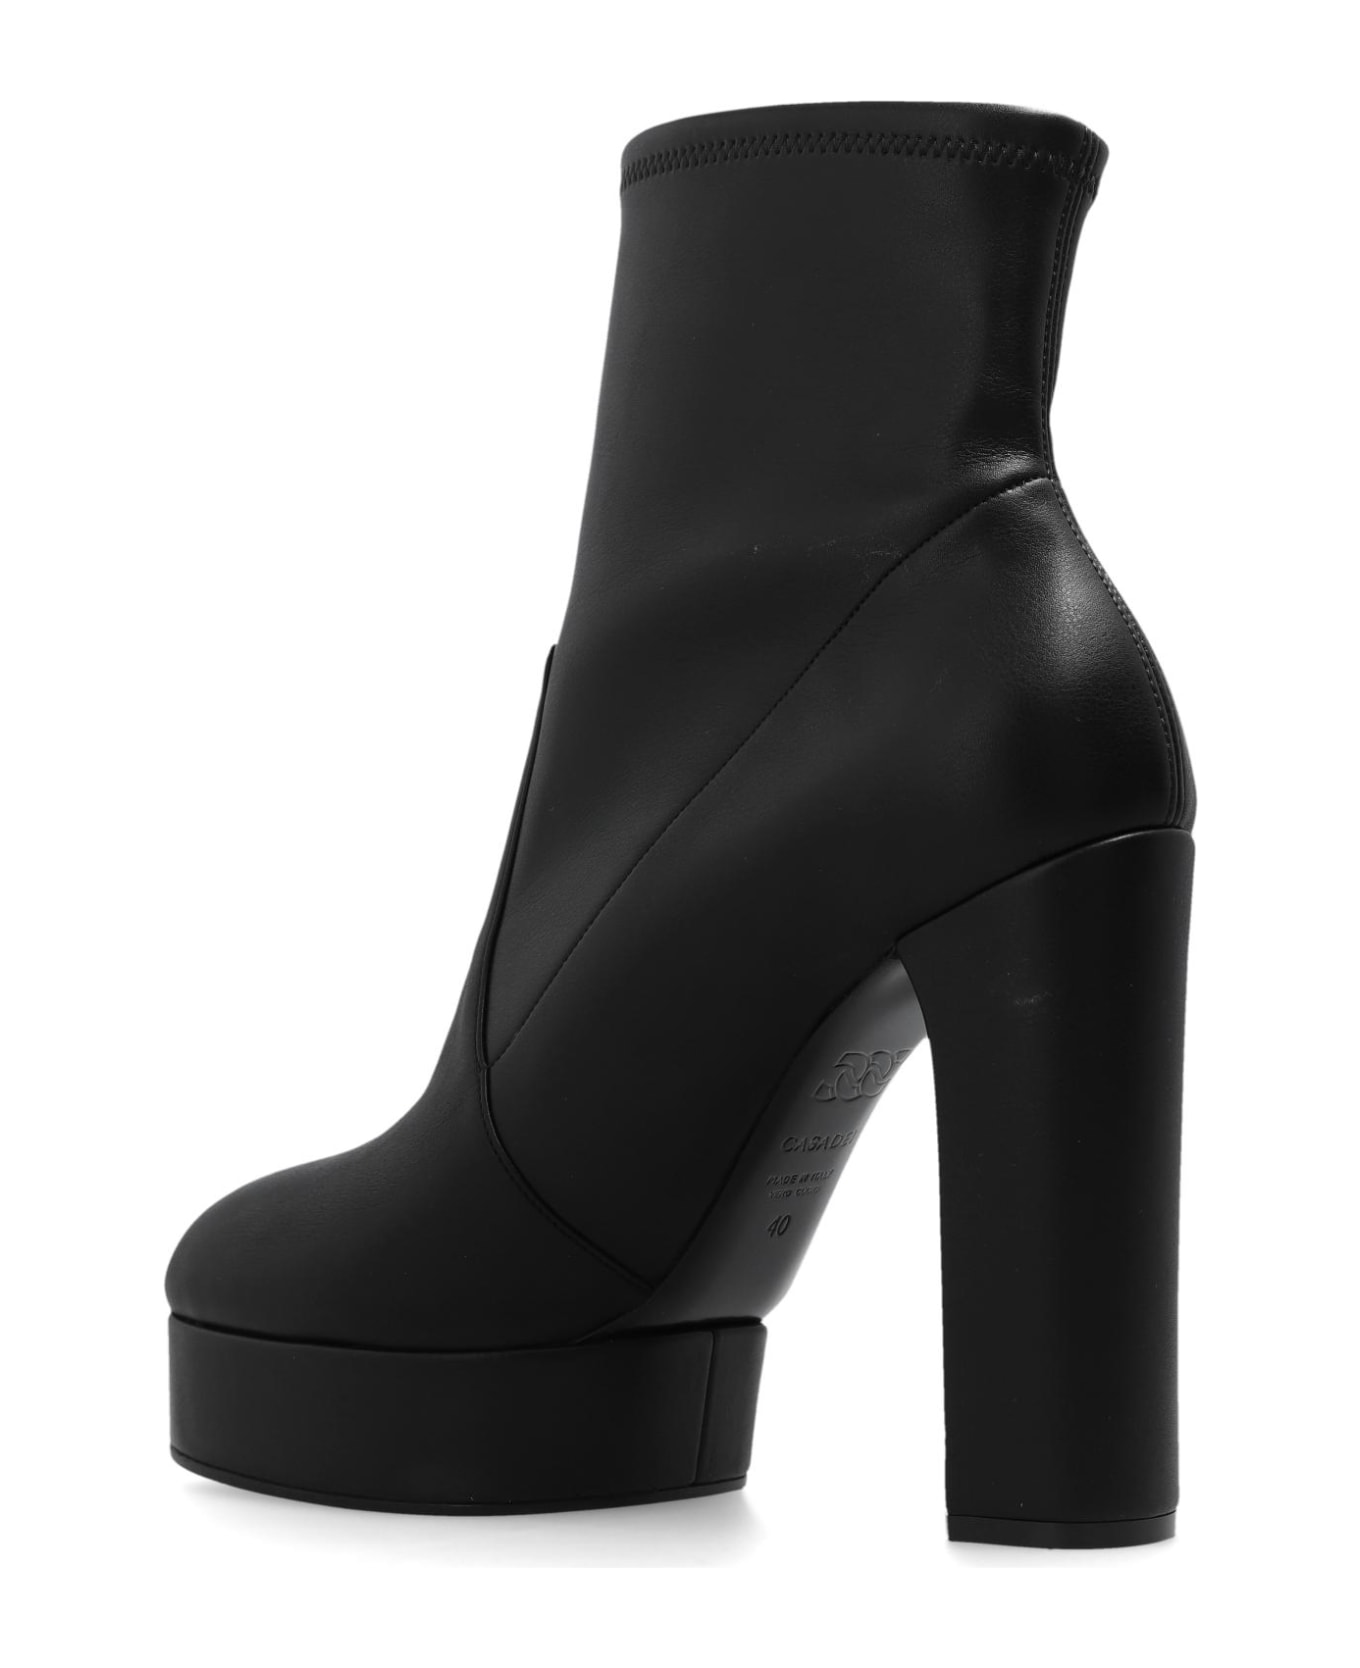 Casadei Heeled Ankle Boots With Leather - Black ブーツ